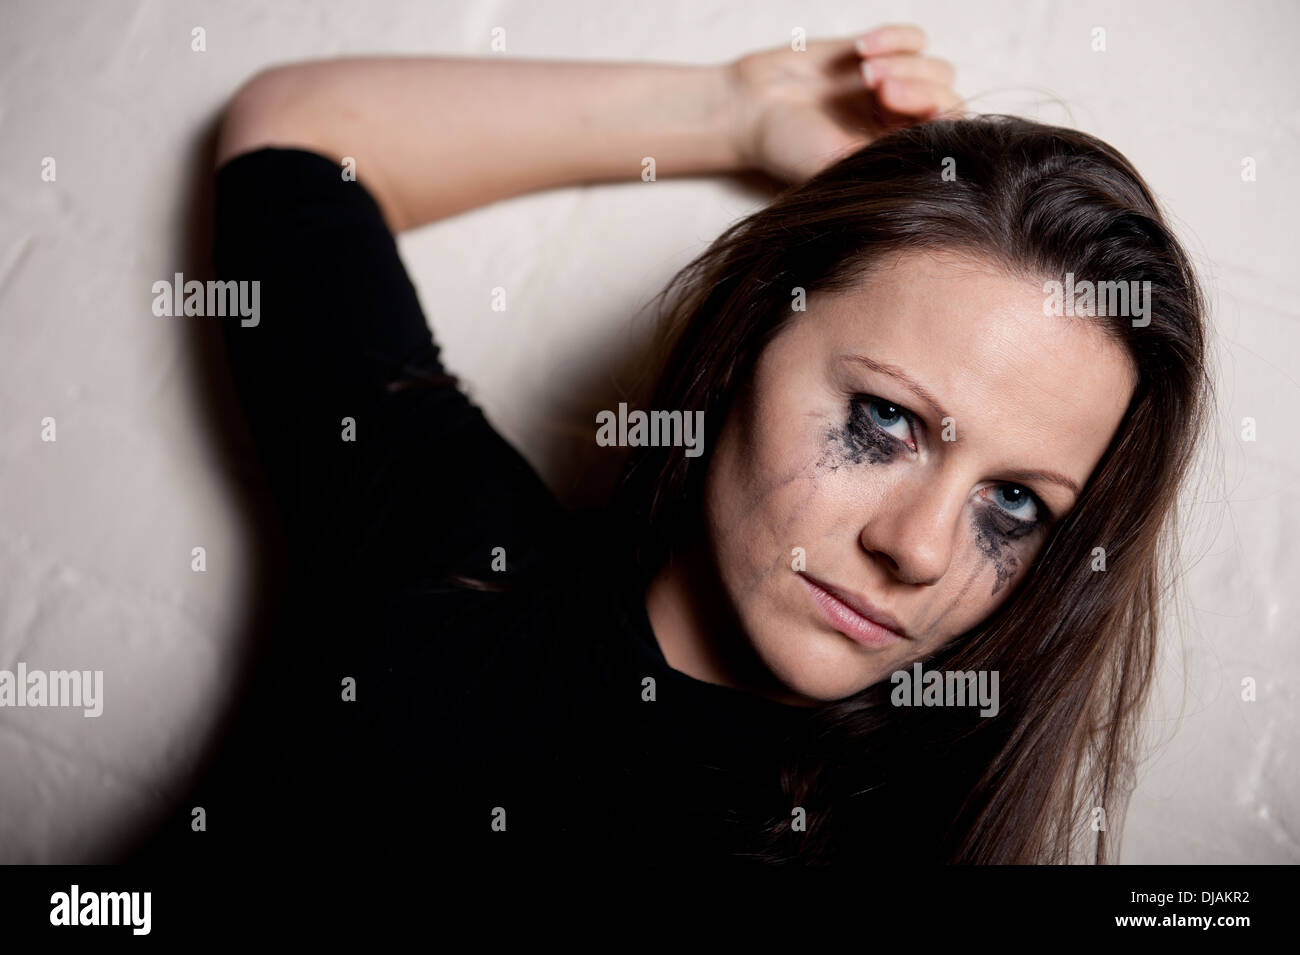 Tearful young woman against a white wall, with her make up running from crying. Stock Photo